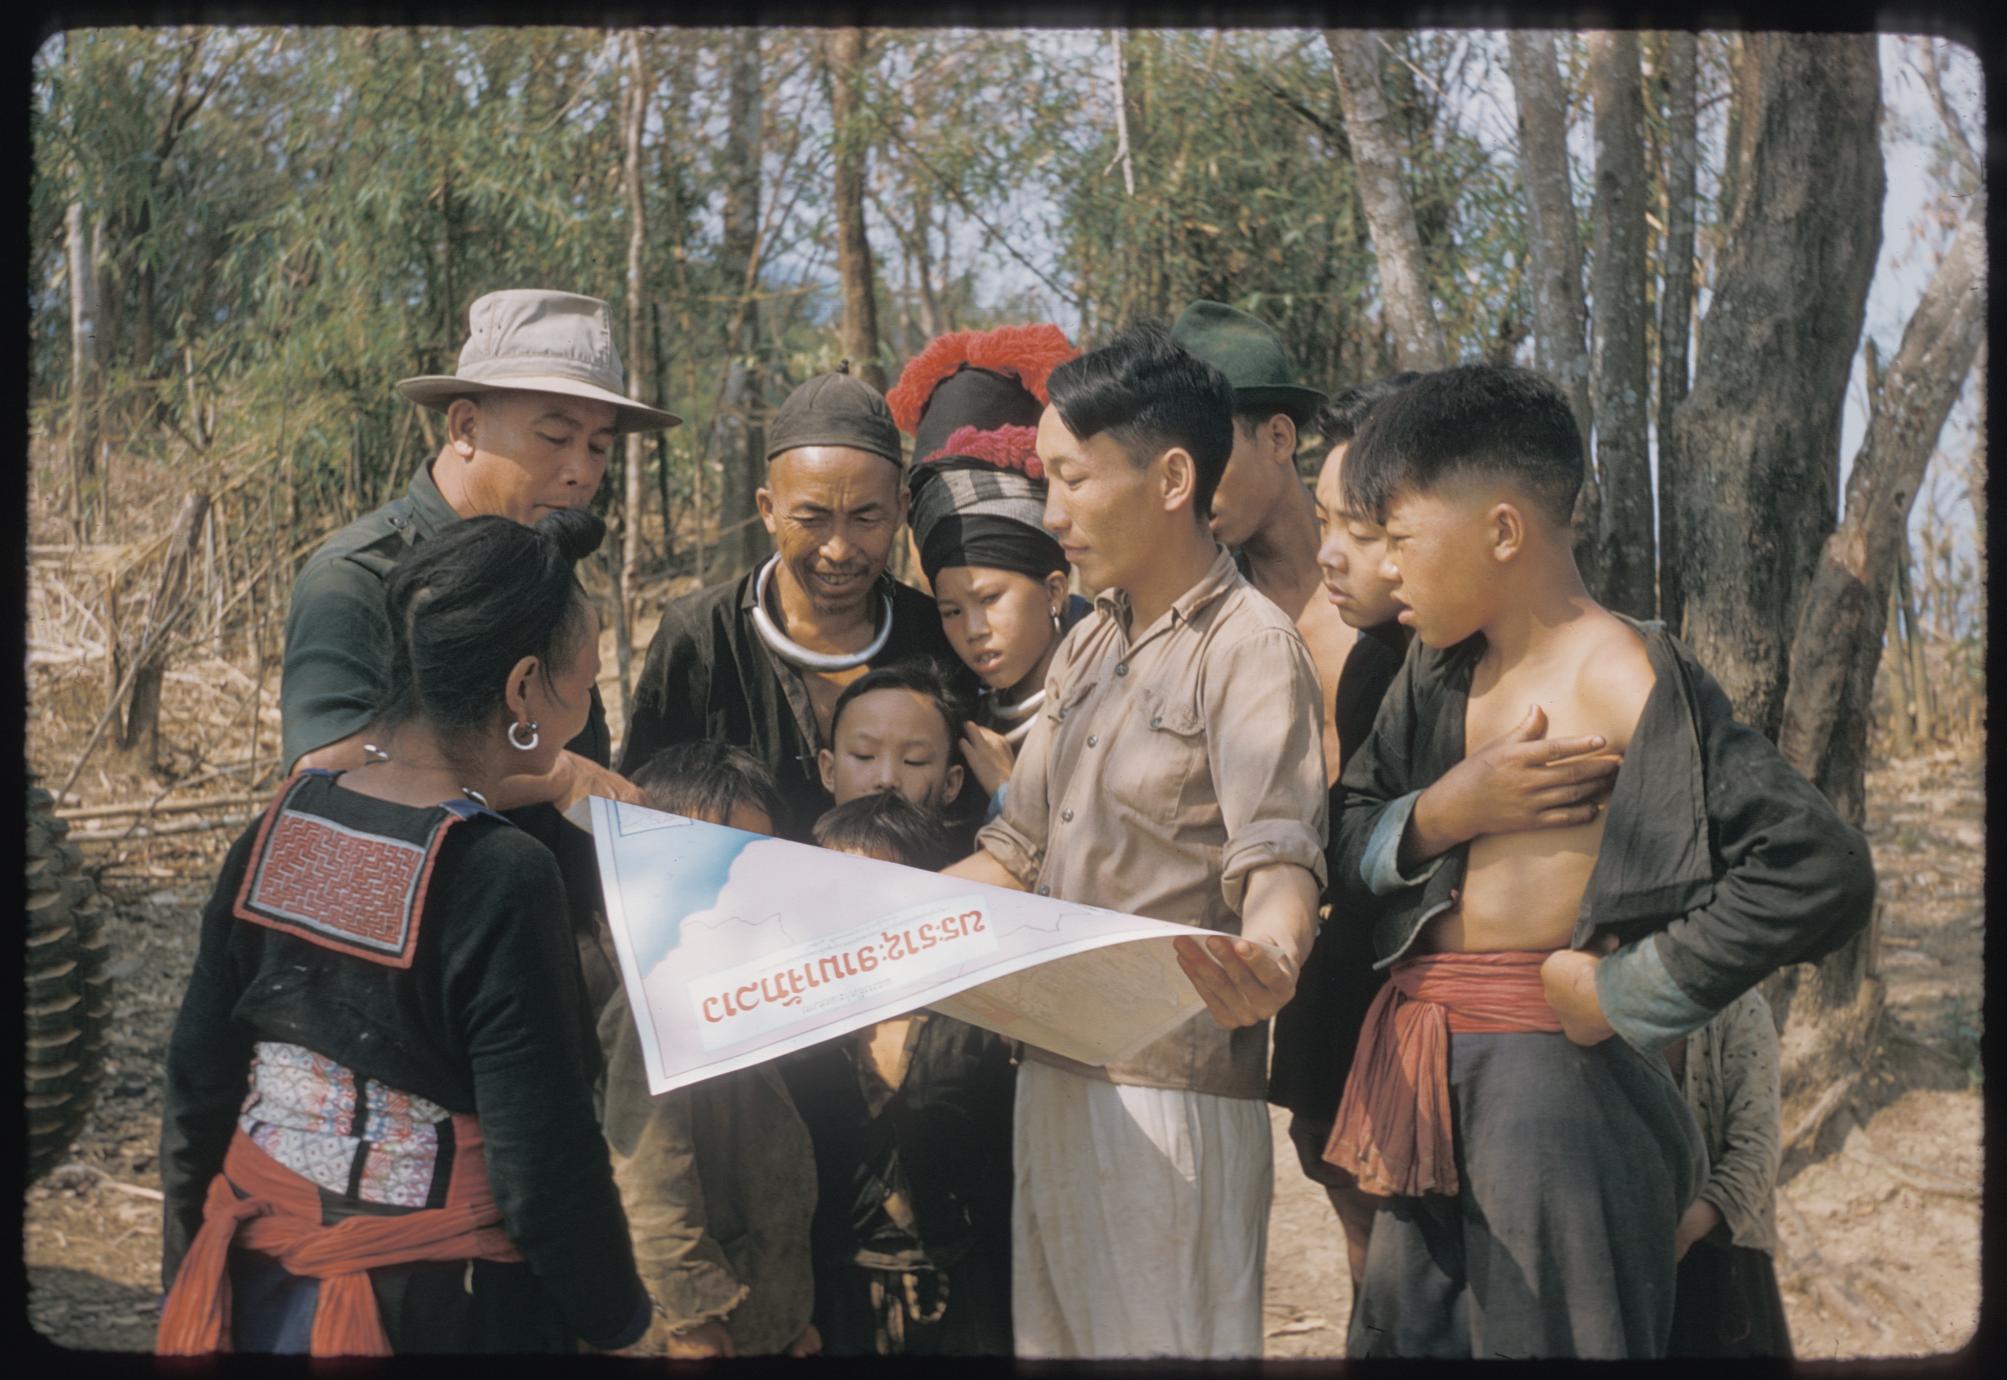 Hmong (Meo) and Inspector of Education with map